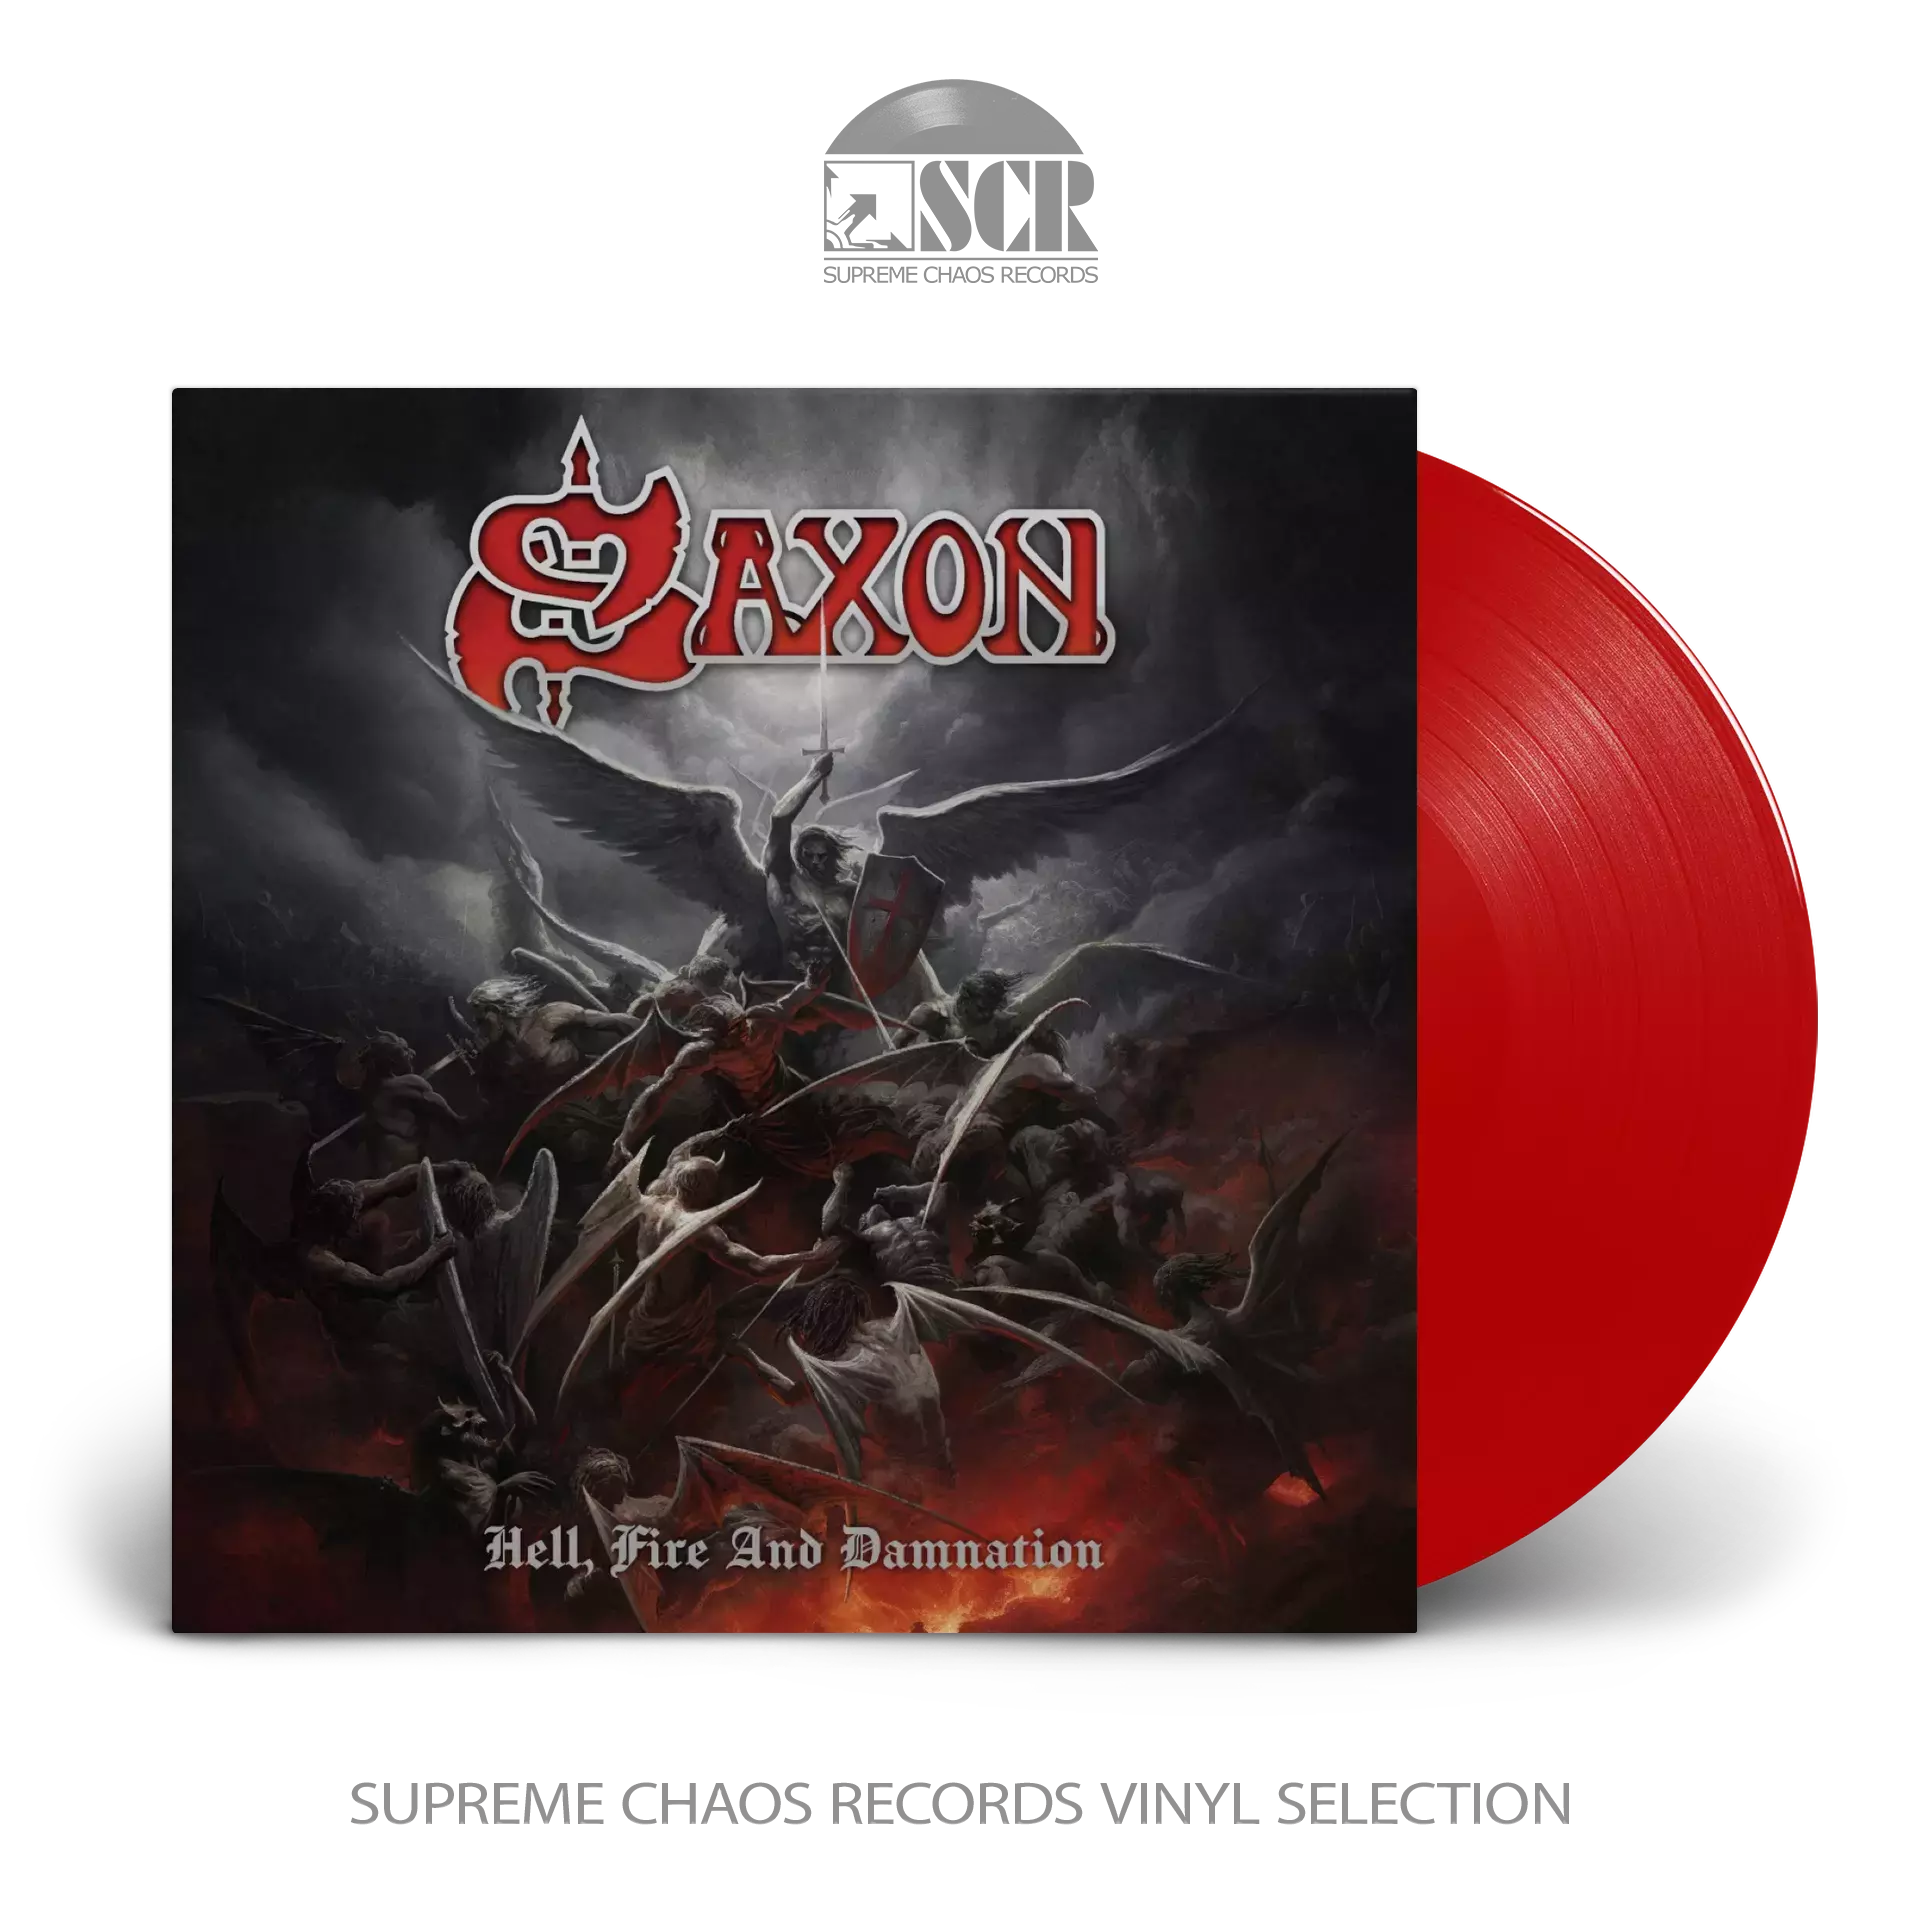 SAXON - Hell, Fire And Damnation [RED LP]